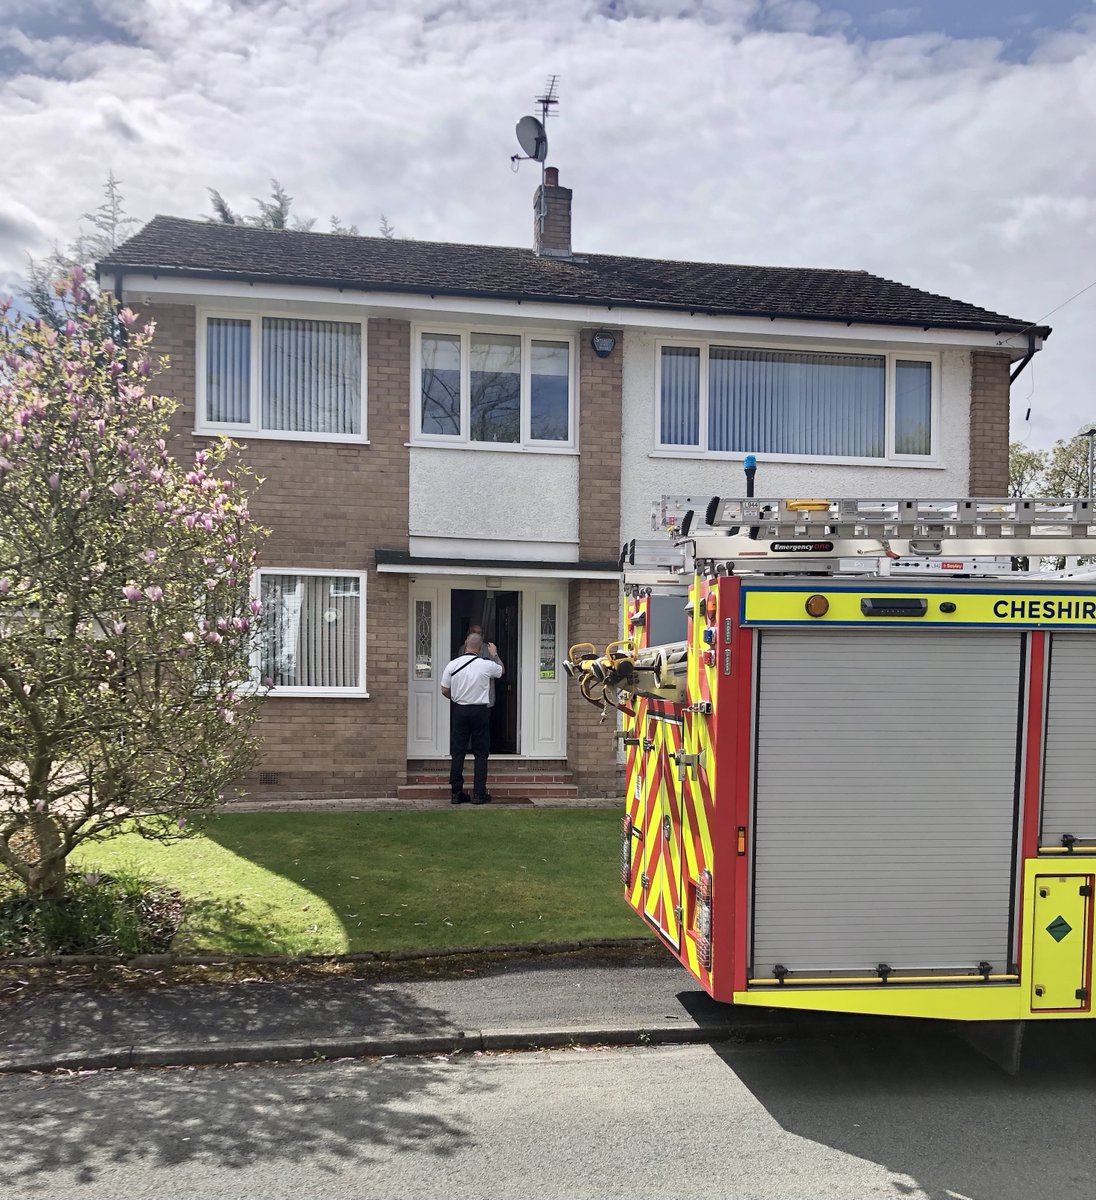 This morning, White Watch have been out conducting Safe & Well visits in a number of streets across Lymm. To see if you are eligible for a free Home Fire Safety Check, follow the link below: orlo.uk/8AbQ6